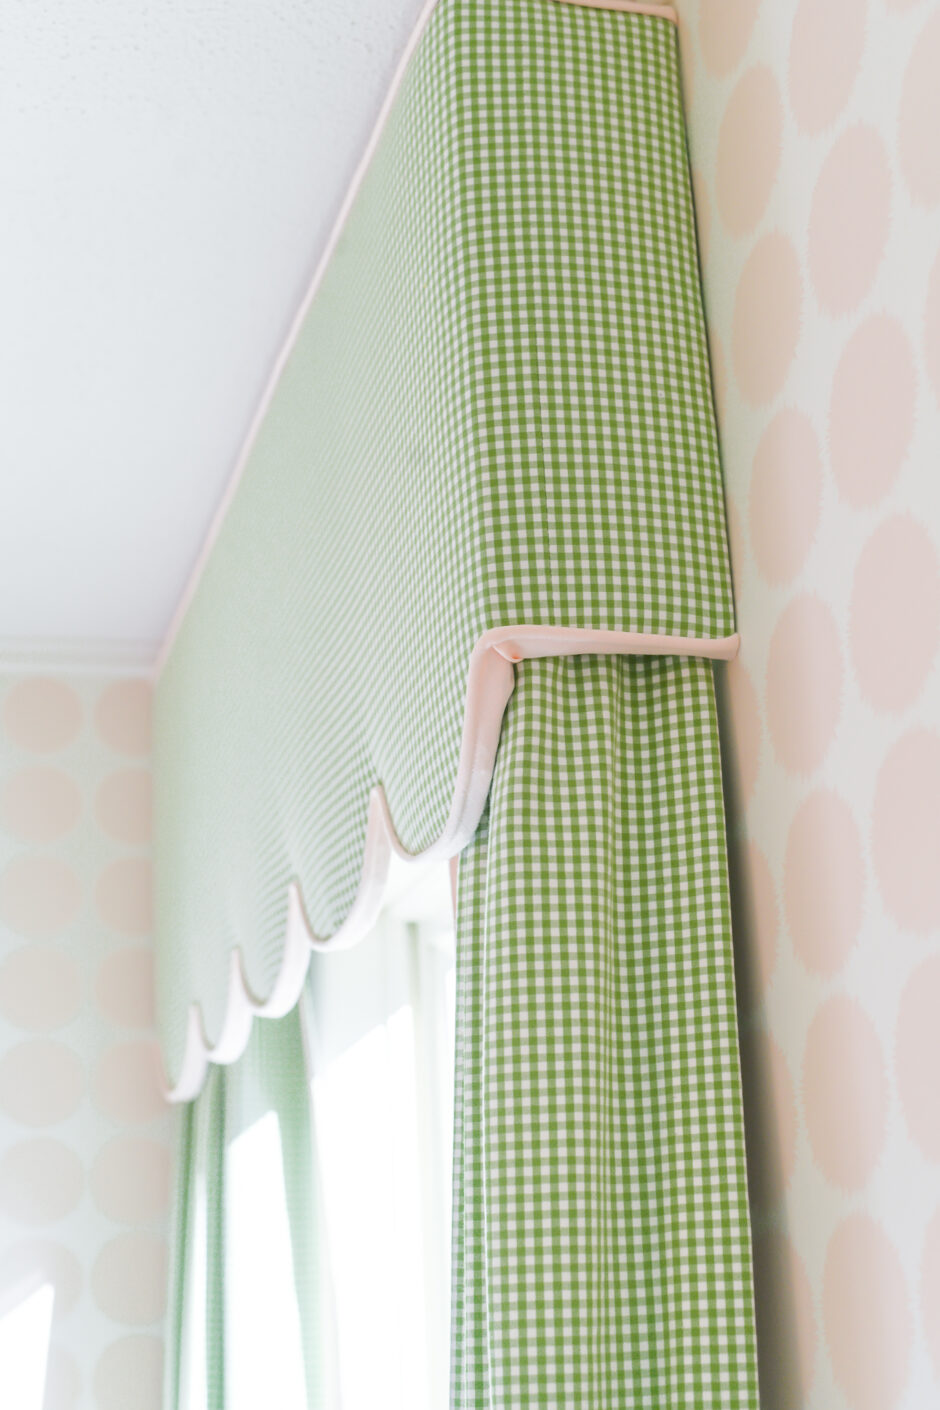 gingham curtains pink and green